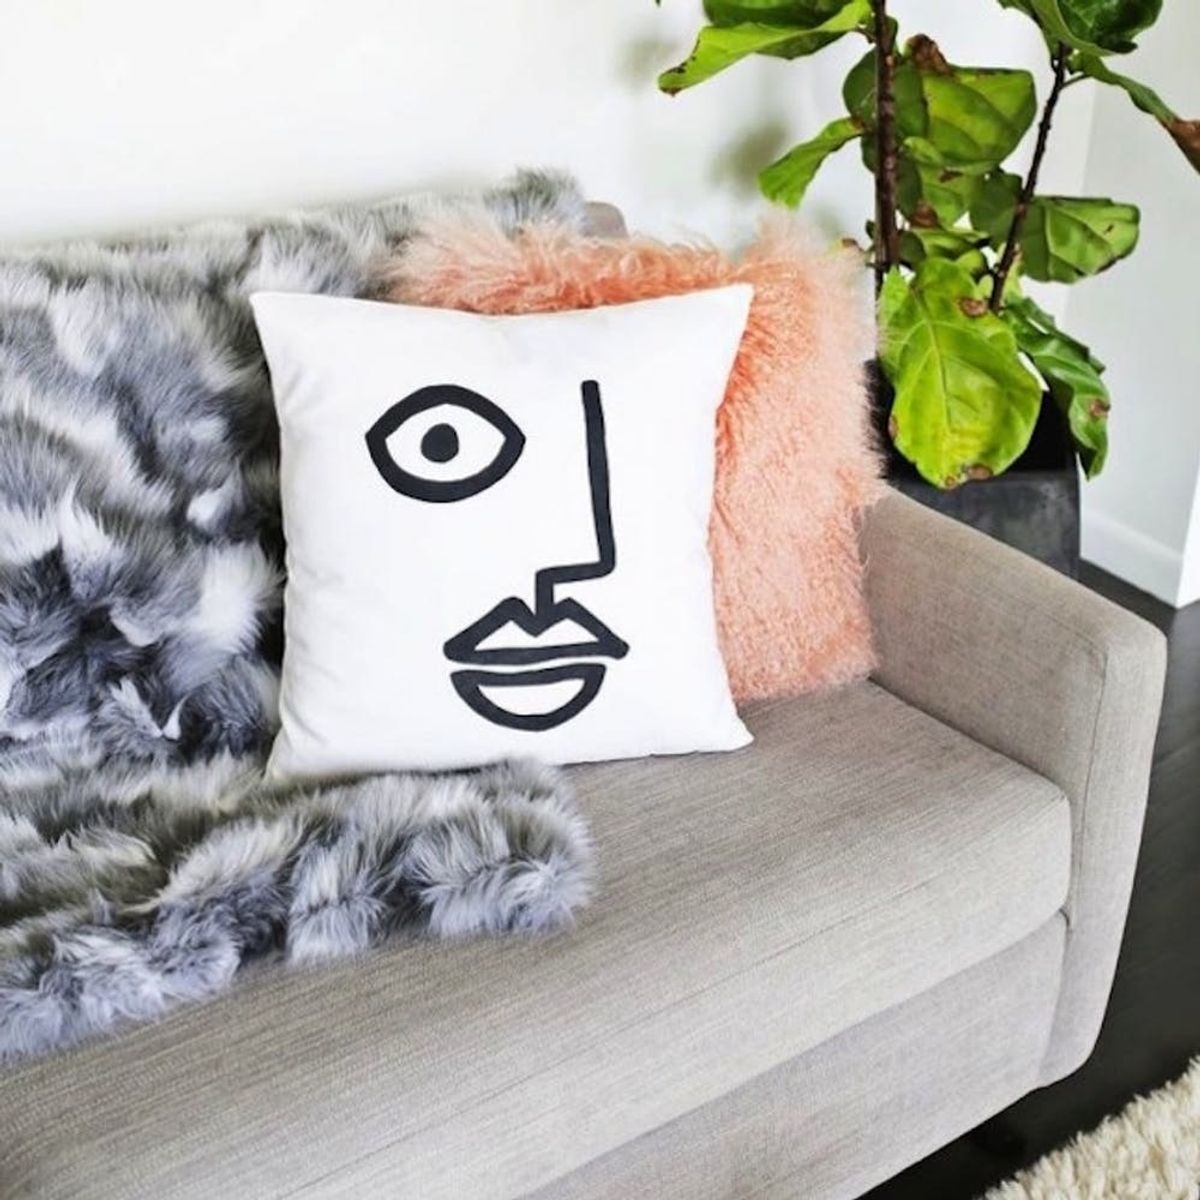 19 DIY Anatomy-Inspired Decor Projects to Catch Your Eye